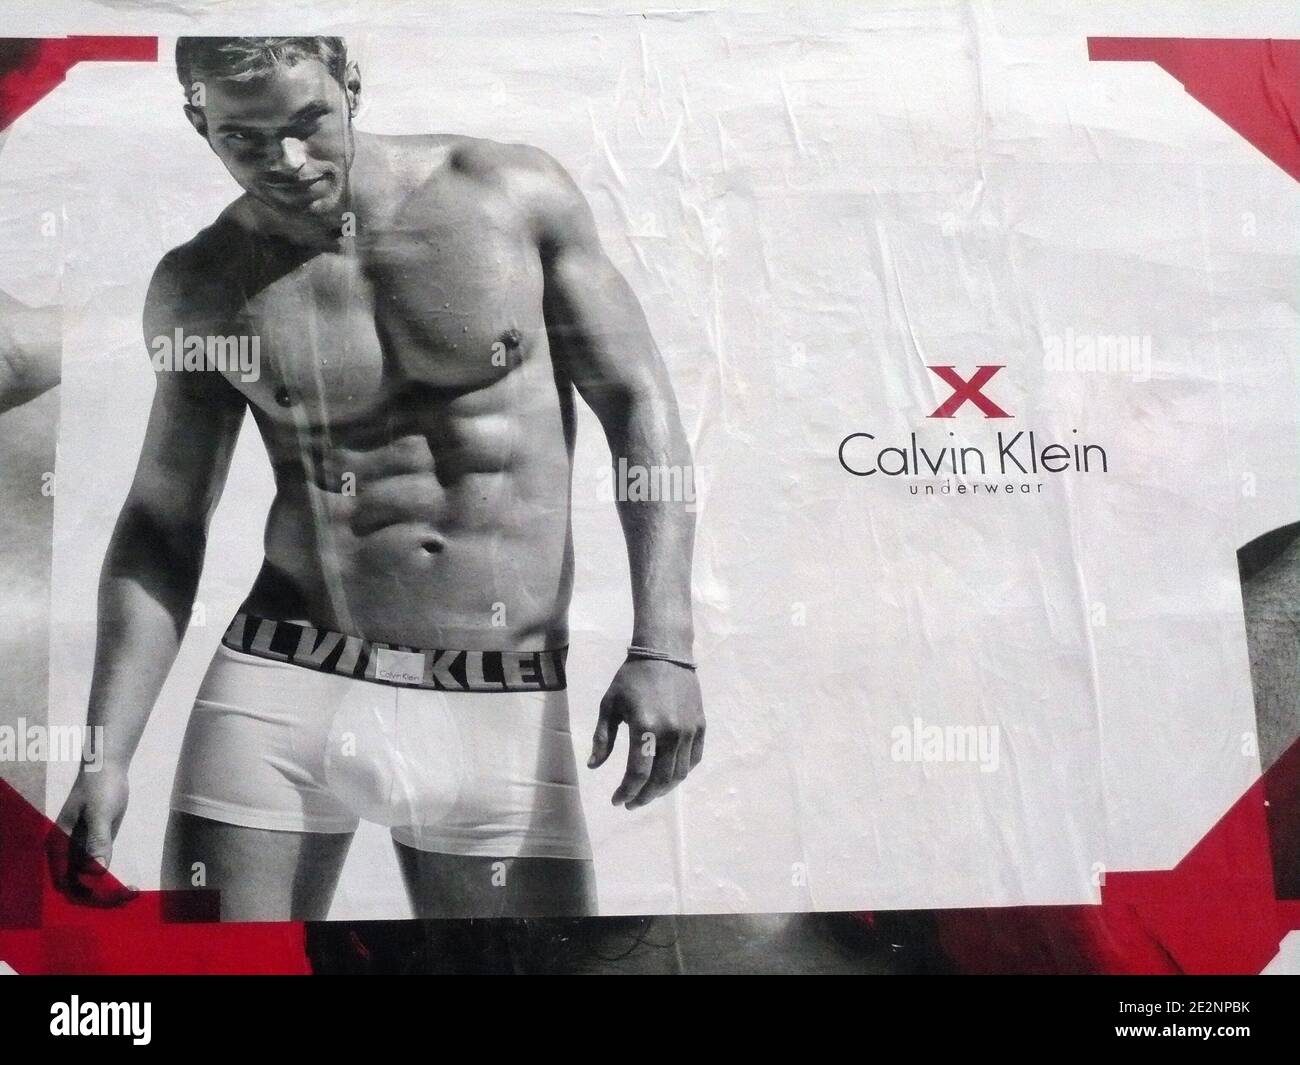 Spanish tennis player Fernando Verdasco and U.S actor Kellan Lutz are seen  in an advertising campaign for Calvin Klein underwears in New York, NY on  March 4, 2010. Photo by Charles Guerin/ABACAPRESS.COM (